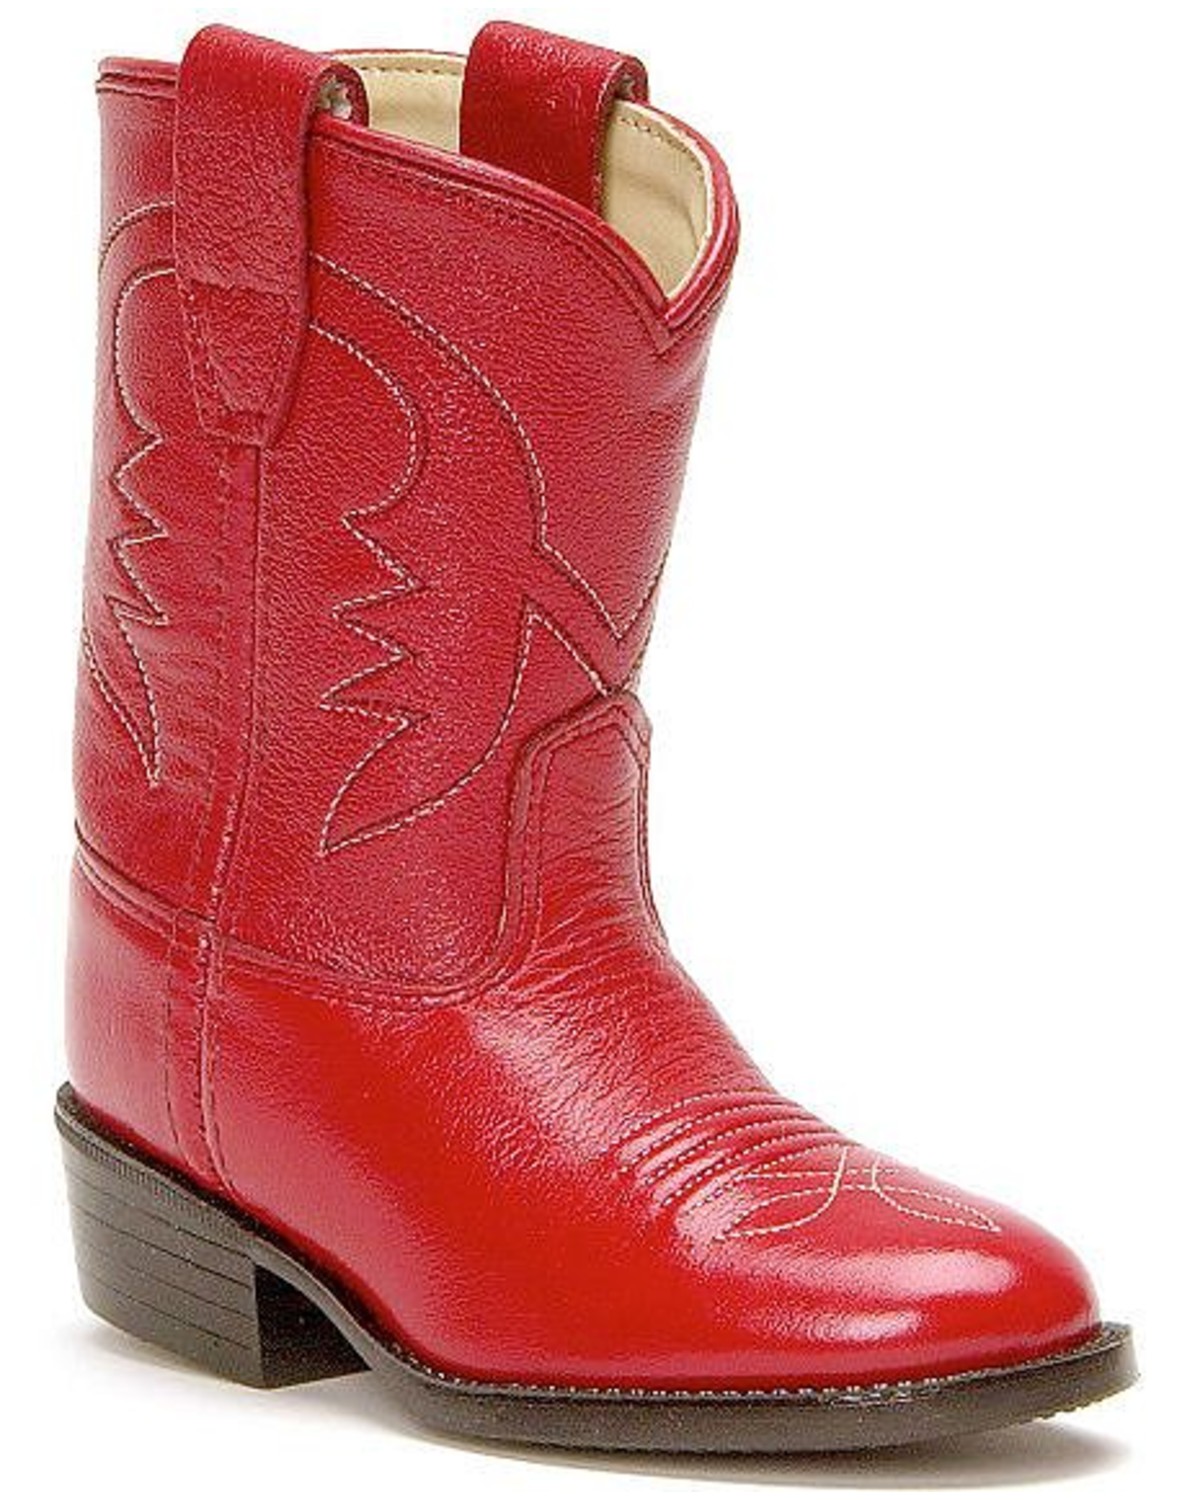 Old West Toddler Girls' Cowboy Boots 